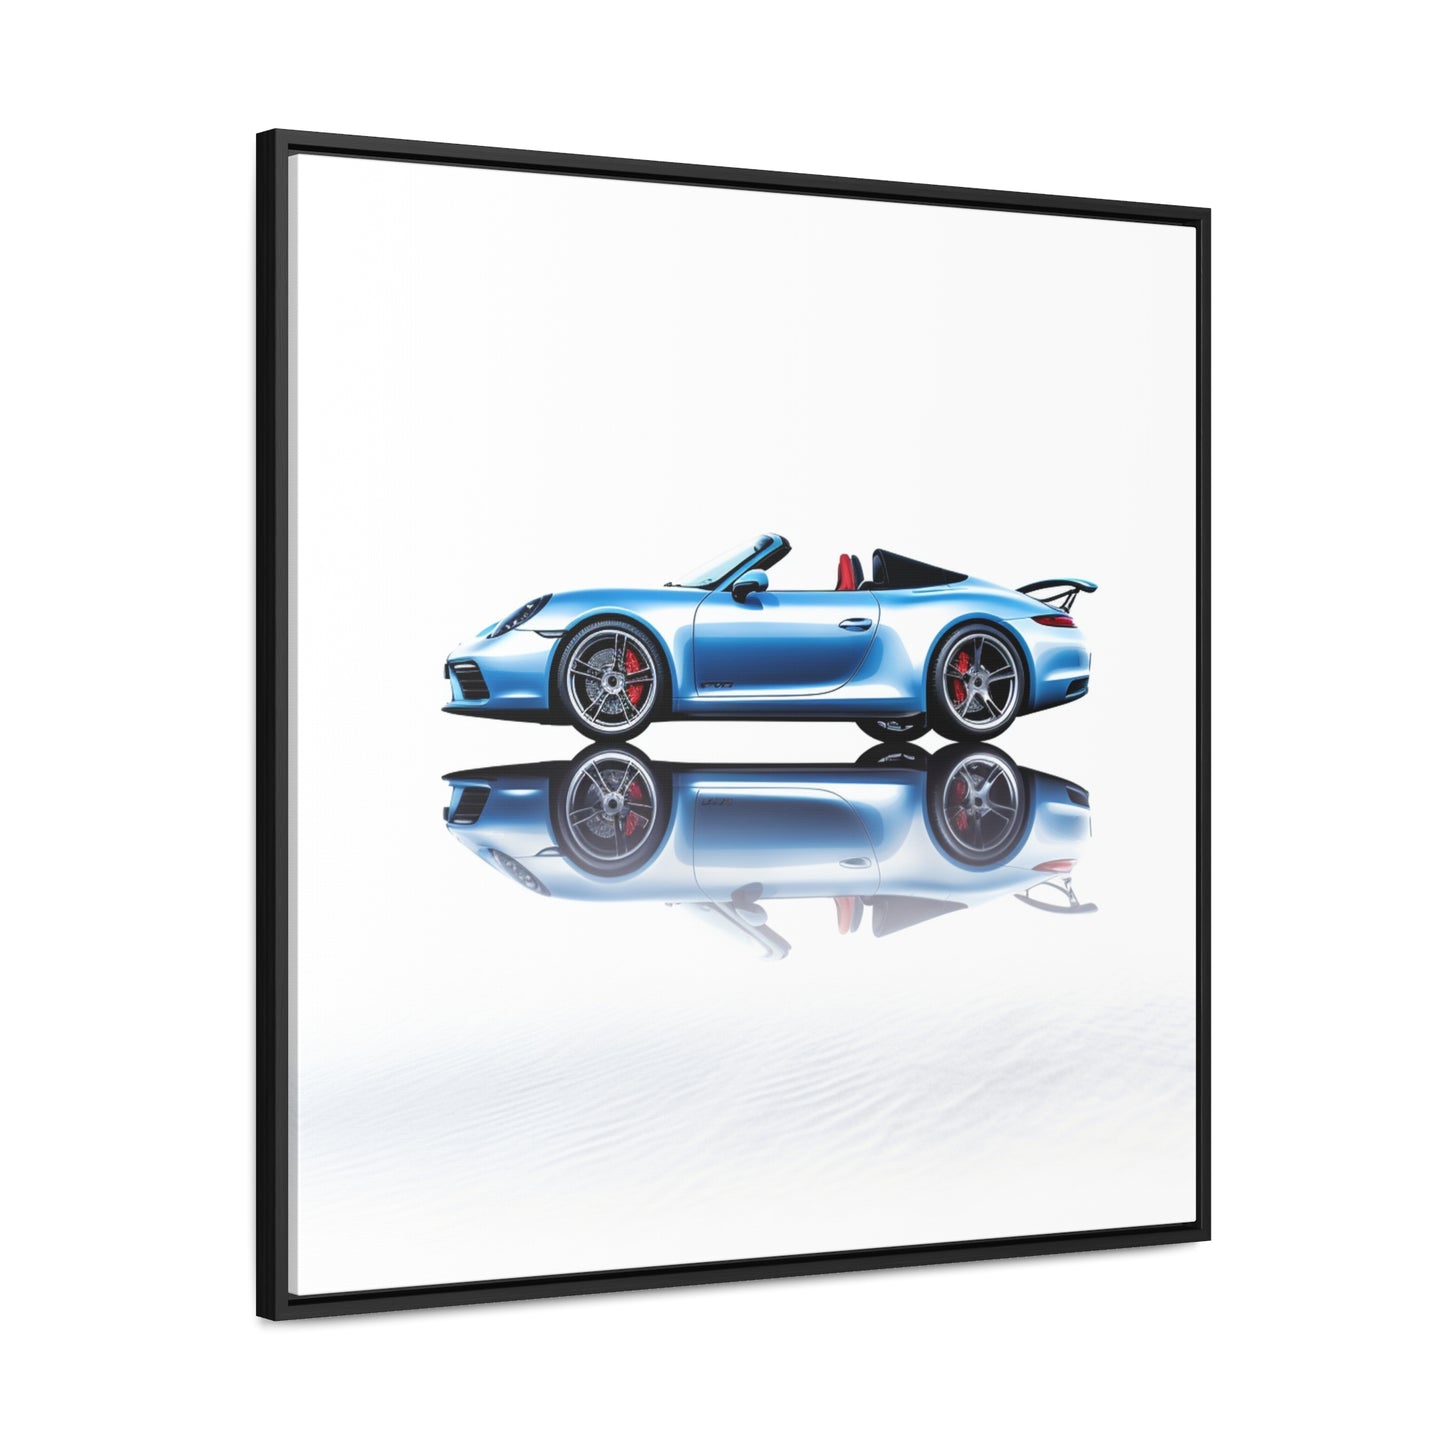 Gallery Canvas Wraps, Square Frame 911 Speedster on water 4